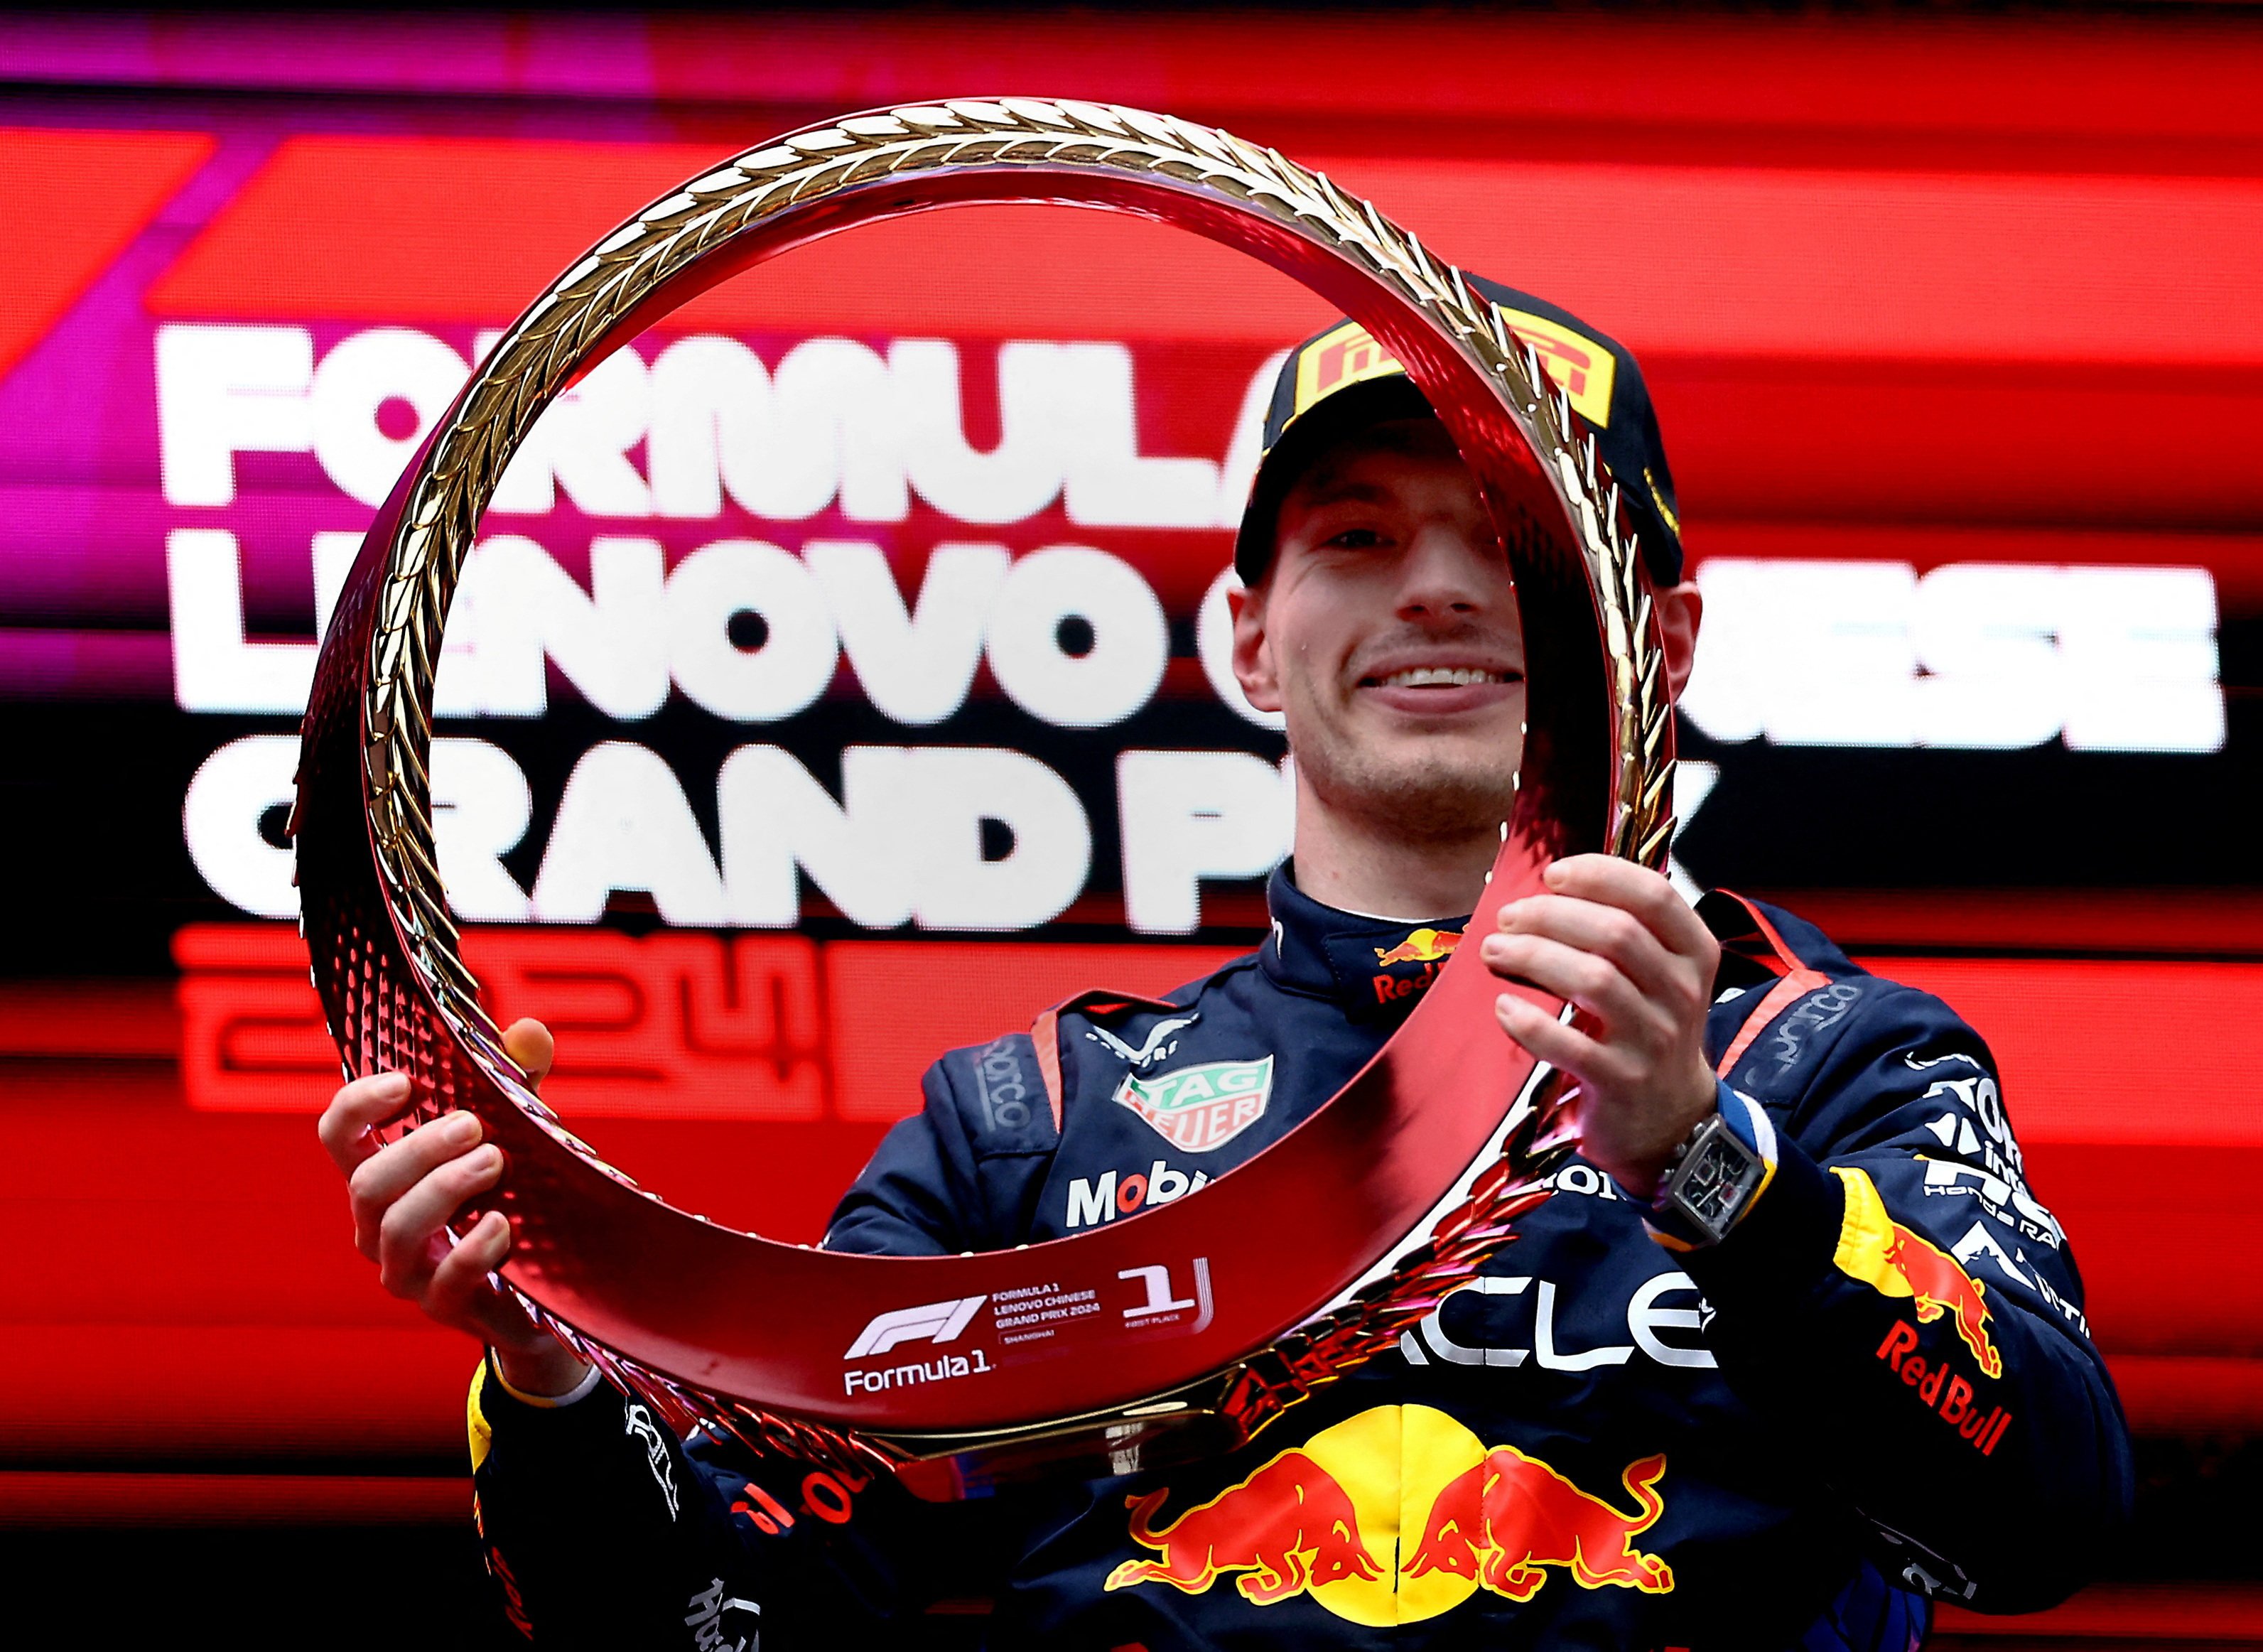 Red Bull’s Max Verstappen celebrates on the podium after winning the Chinese Grand Prix. Photo: Reuters